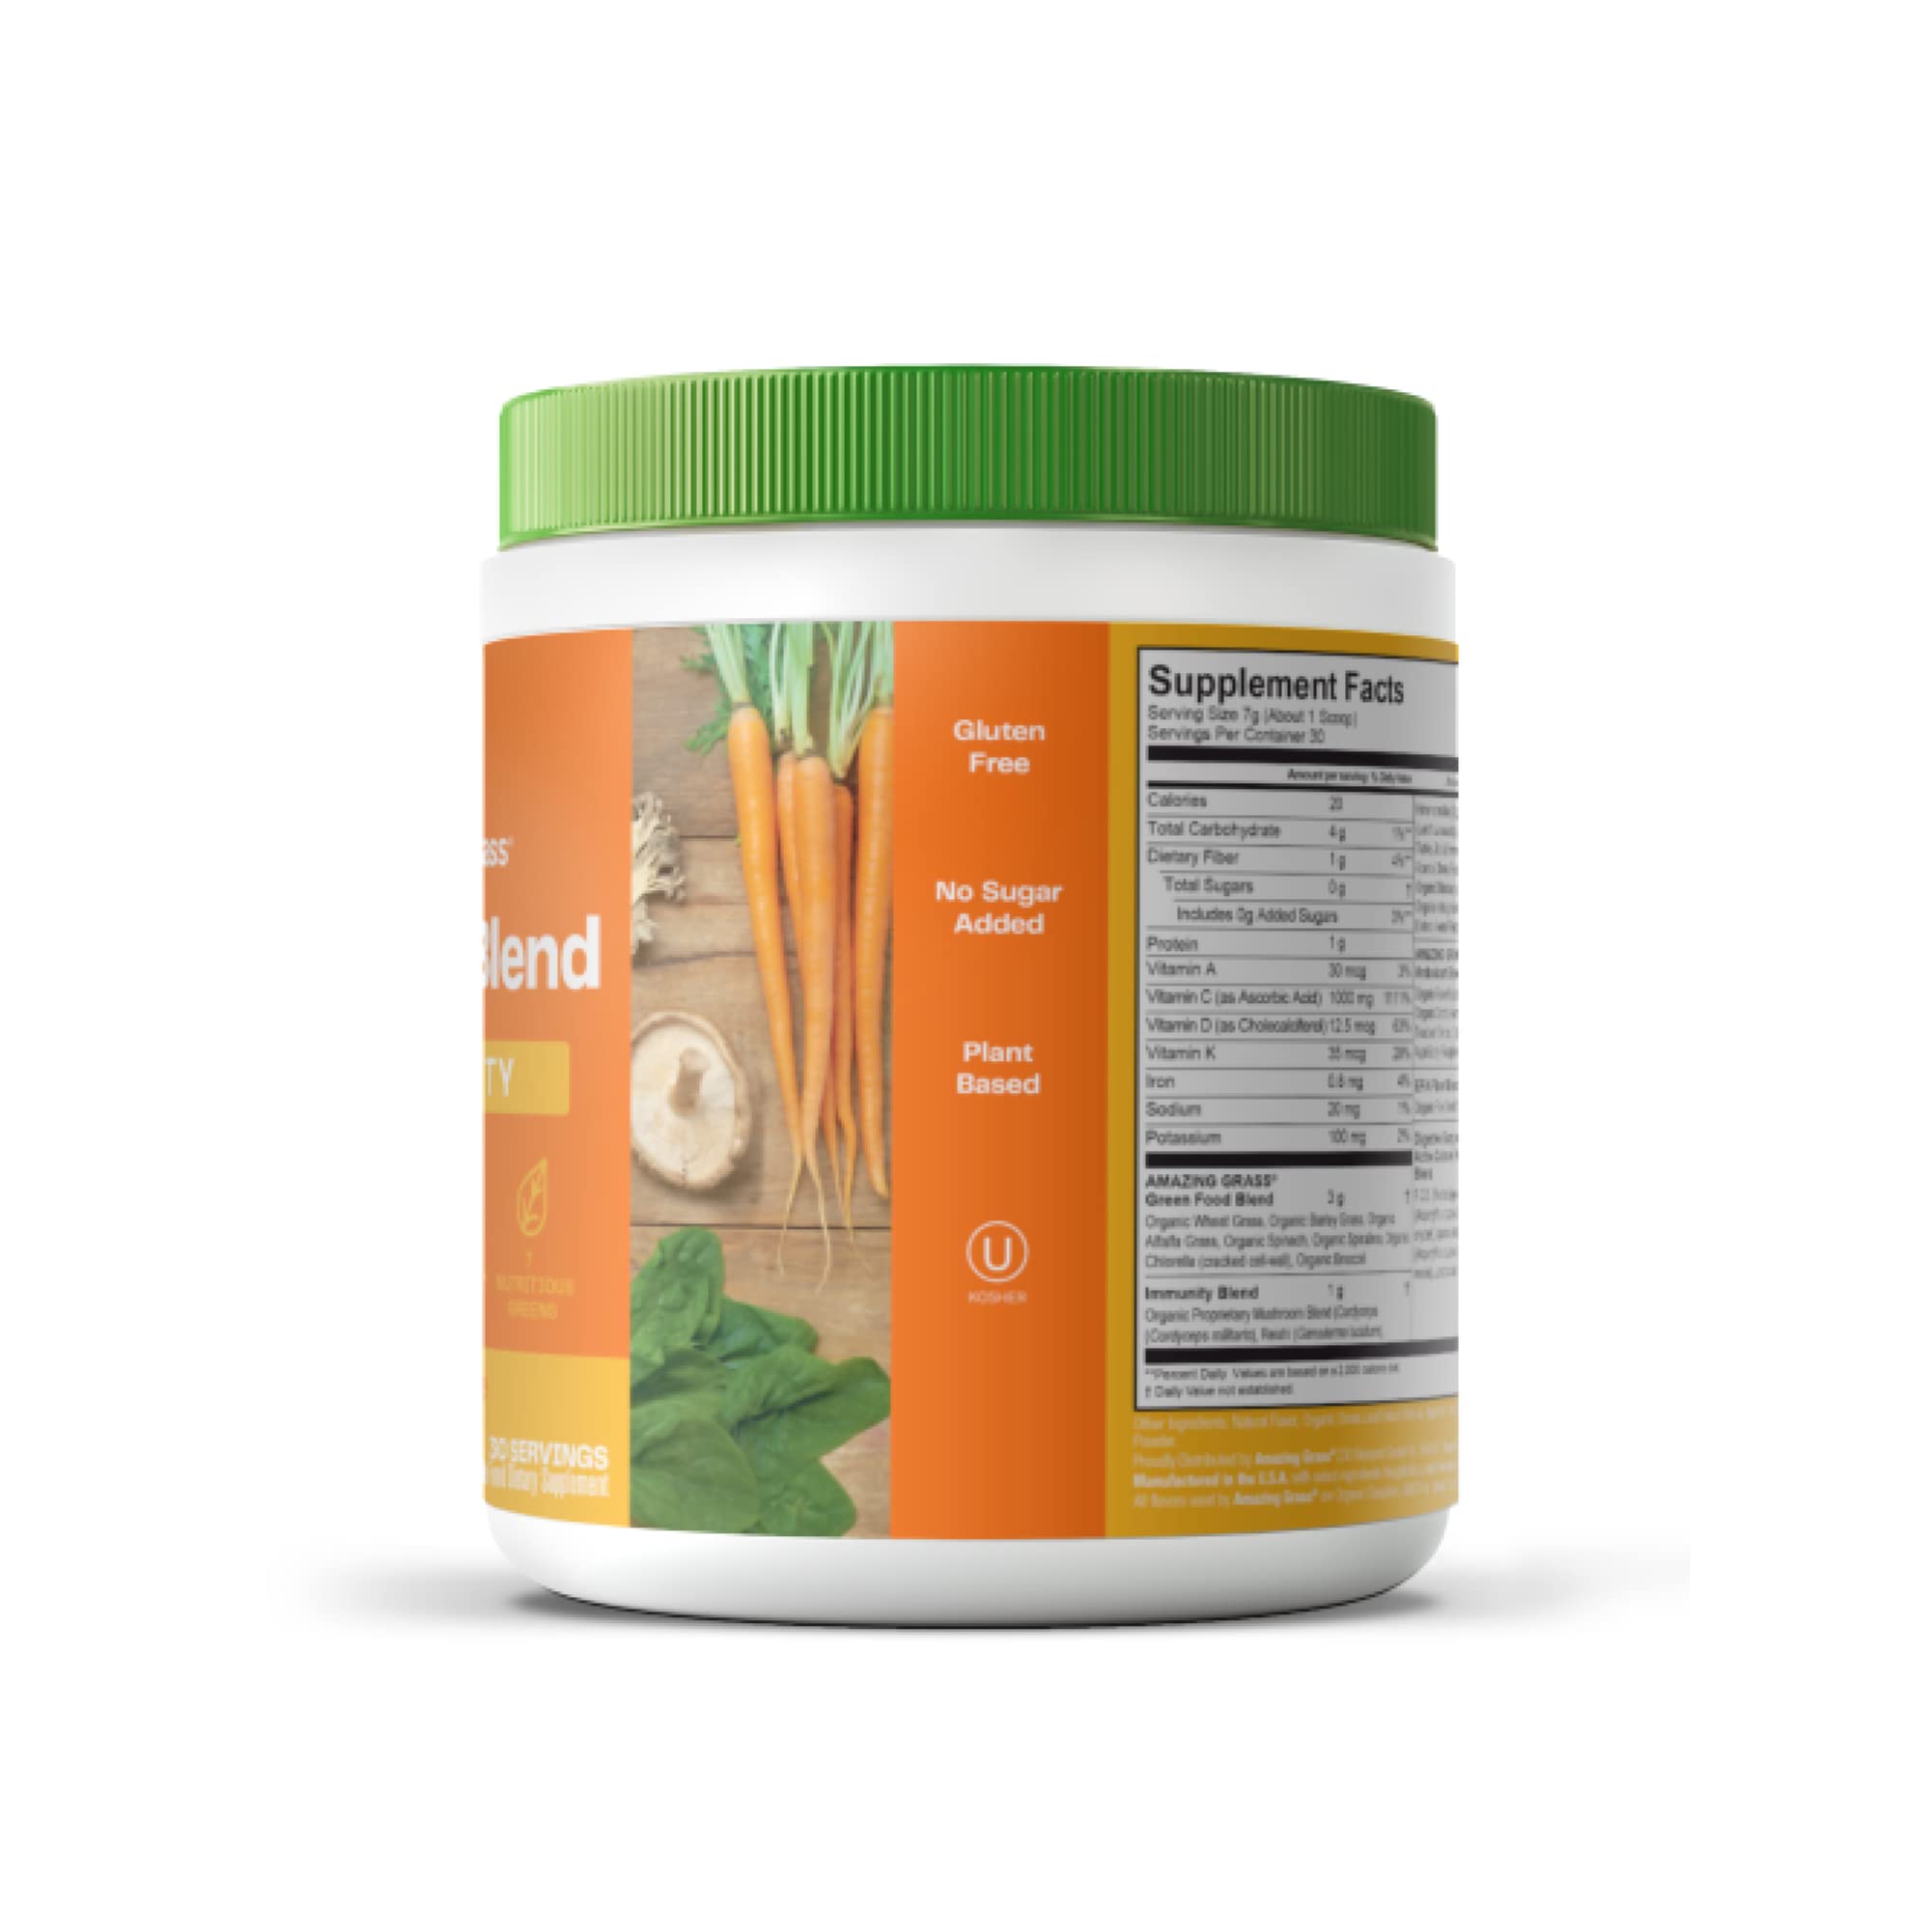 Amazing Grass Greens Blend Superfood for Immune Support: Super Greens Powder Smoothie Mix with Vitamin C, Cordyceps, Beet Root Powder & Reishi Mushrooms, Tangerine, 30 Servings